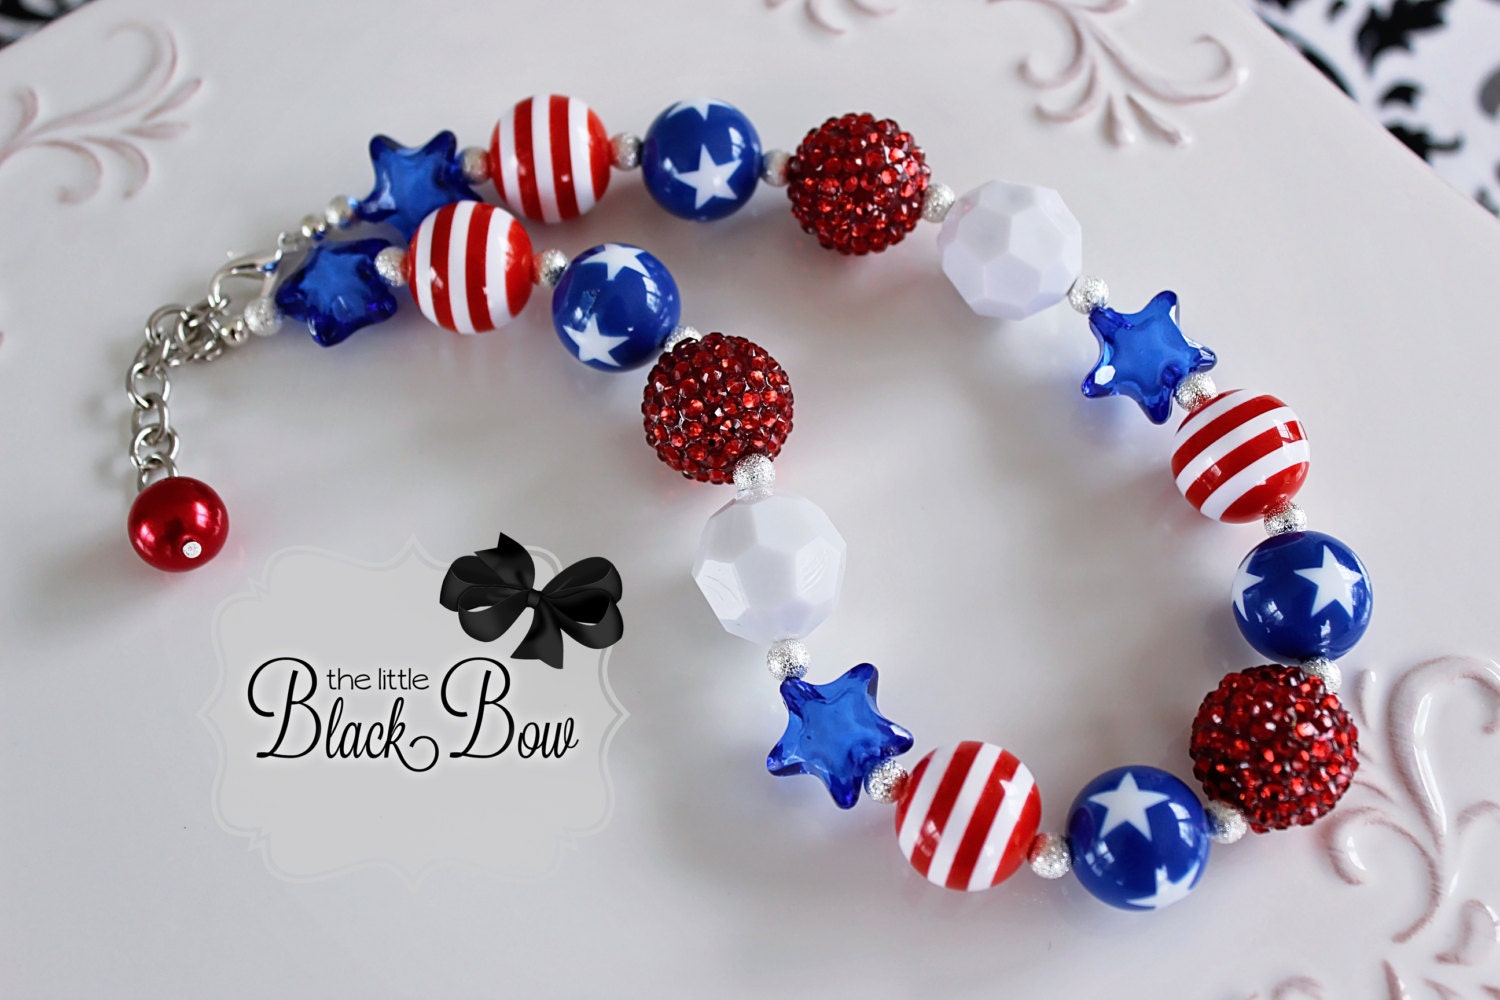 Dyhayaer 100 Pcs 4th of July Beads Bulk, Metallic Red Bule Silver Patriotic  Star Bead Necklaces for 4th of July Independence Day, Patriotic Parade